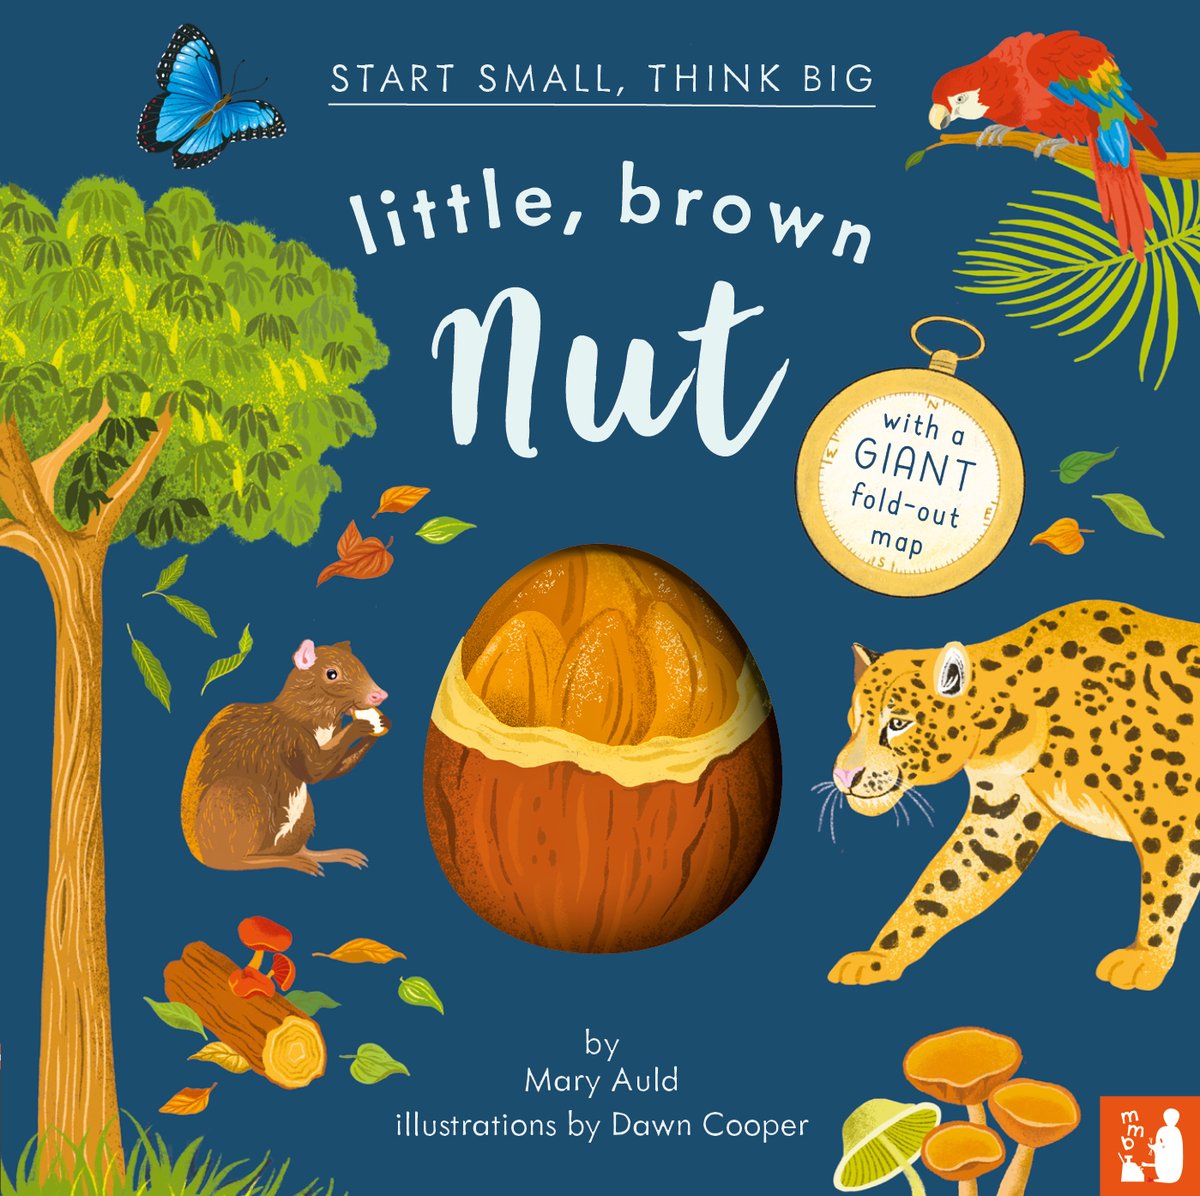 ⭐️#Giveaway: We hope you've been enjoying the #StartSmallThinkBig_MMB reviews. If you're keen to get your hands on #SmallSpeckledEgg and #LittleBrownNut please follow us, like and RT this post! UK only, ends midnight 26/11. One lucky person will get both books. #Edutwitter